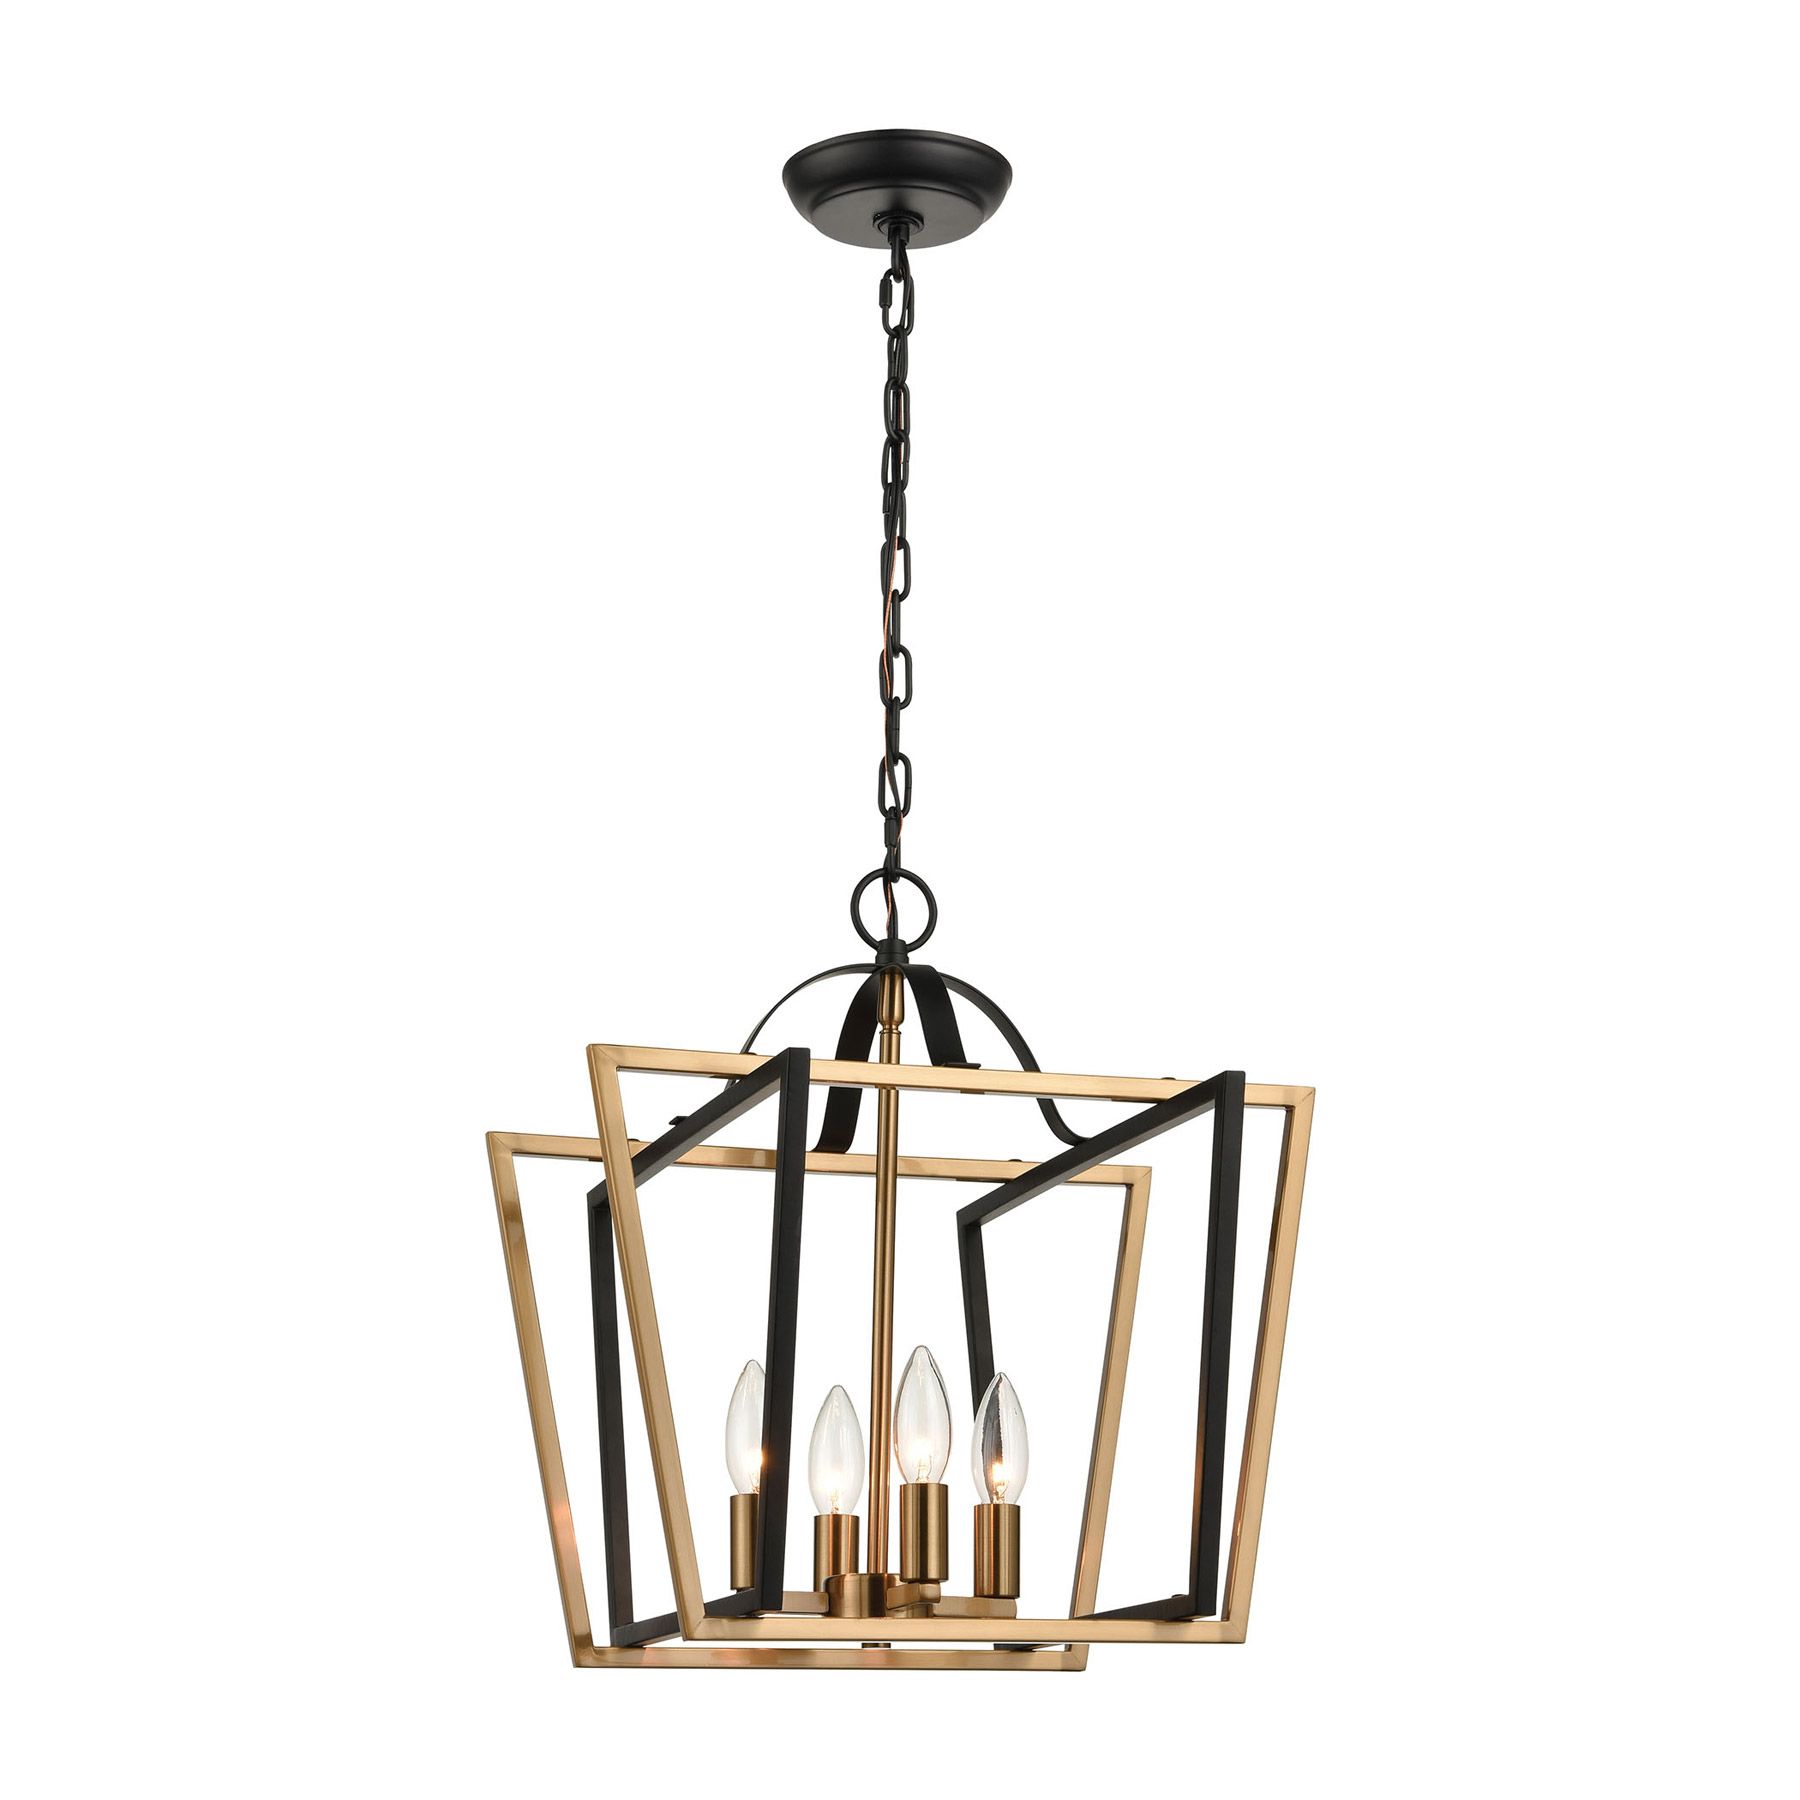 Isle Matte Black Four Light Chandeliers Pertaining To Most Current Elk Lighting 18355/4 4 Light Pendant In Matte Black And (View 12 of 15)